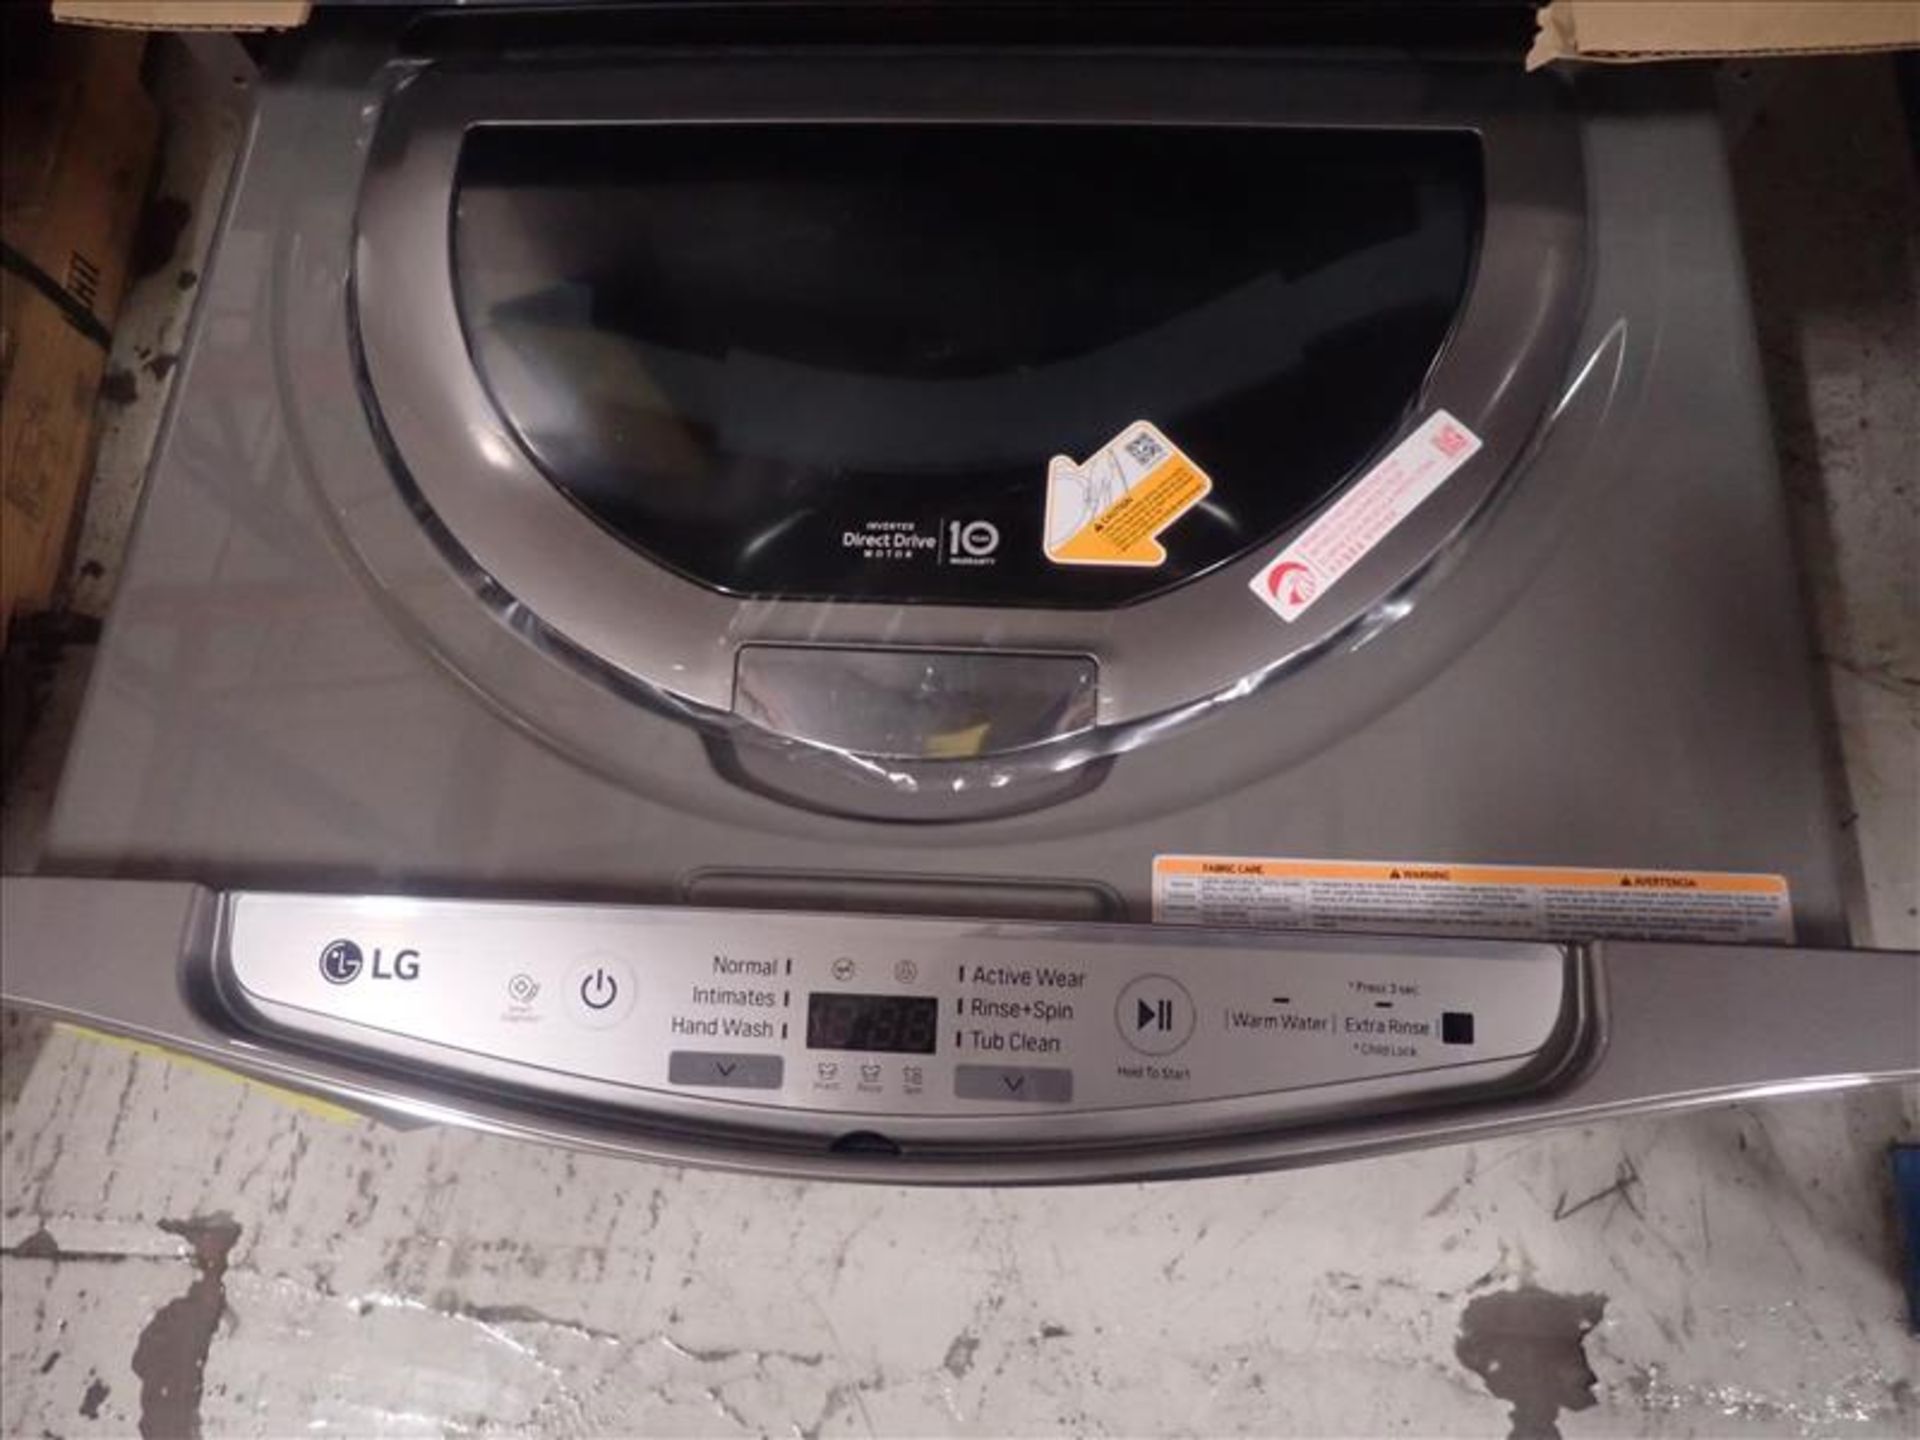 LG pedestal clothes washer, mod. WD100CV, stainless steel finish, T3 refurbished - Image 3 of 6